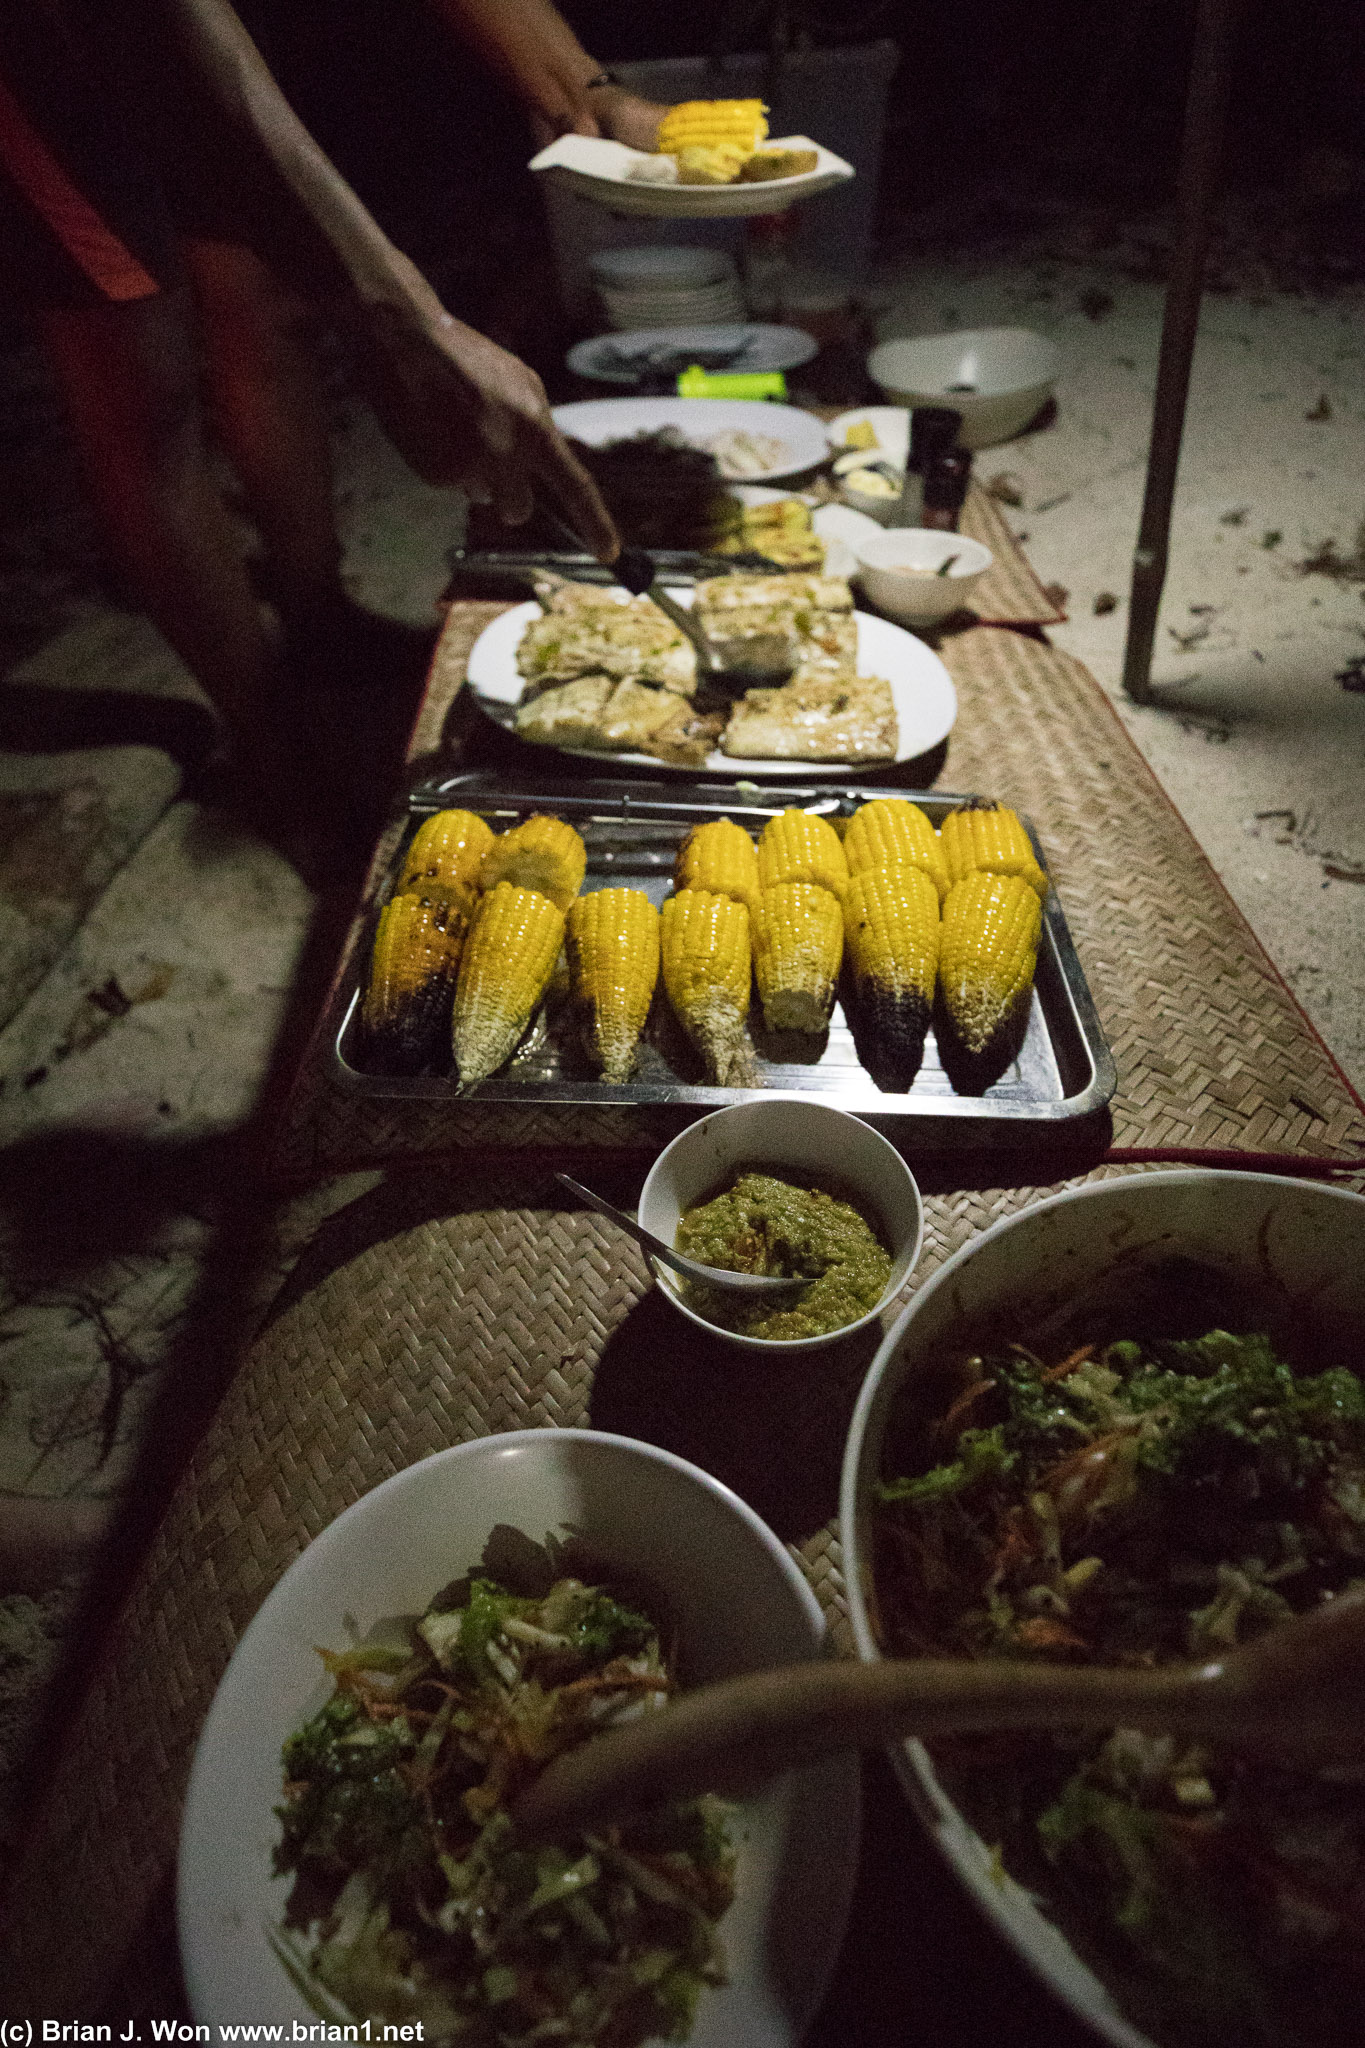 Roast corn, grilled fish, salad, potatoes... quite a meal!